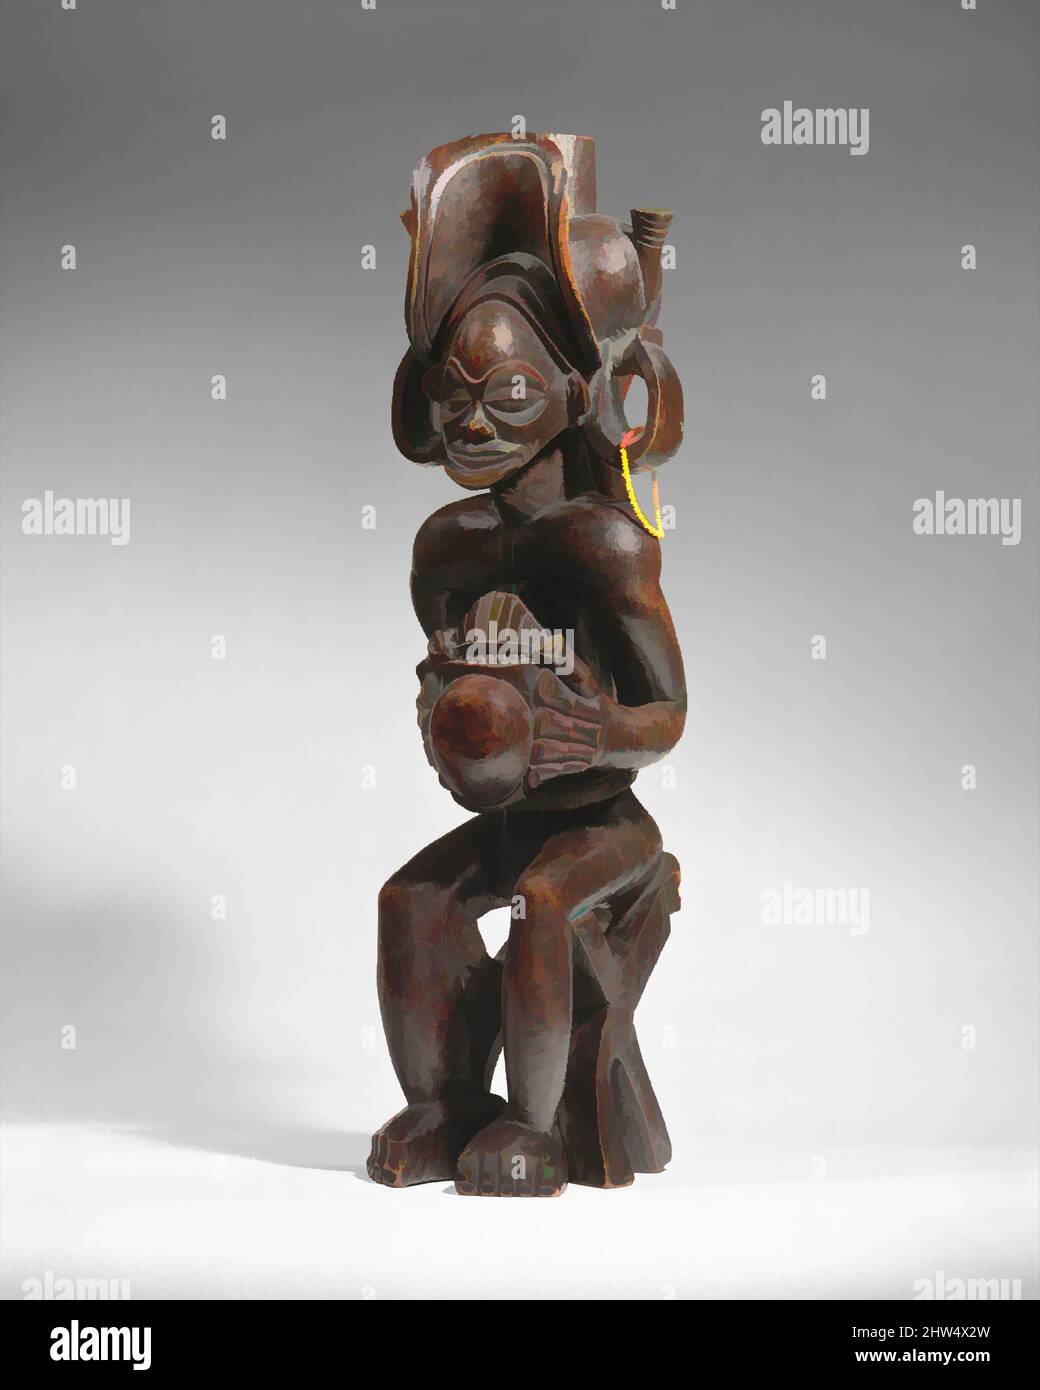 Art inspired by Seated Chief Playing Thumb Piano (Mwanangana), before 1869, Angola, Chokwe peoples, Wood (Uapaca), cloth, fiber, beads, H. 16 3/4 x W. 4 3/4 x D. 5 1/4 in. (42.5 x 12.1 x 13.3 cm), Wood-Sculpture, By the early nineteenth century, Chokwe chiefs in the savanna of present-, Classic works modernized by Artotop with a splash of modernity. Shapes, color and value, eye-catching visual impact on art. Emotions through freedom of artworks in a contemporary way. A timeless message pursuing a wildly creative new direction. Artists turning to the digital medium and creating the Artotop NFT Stock Photo